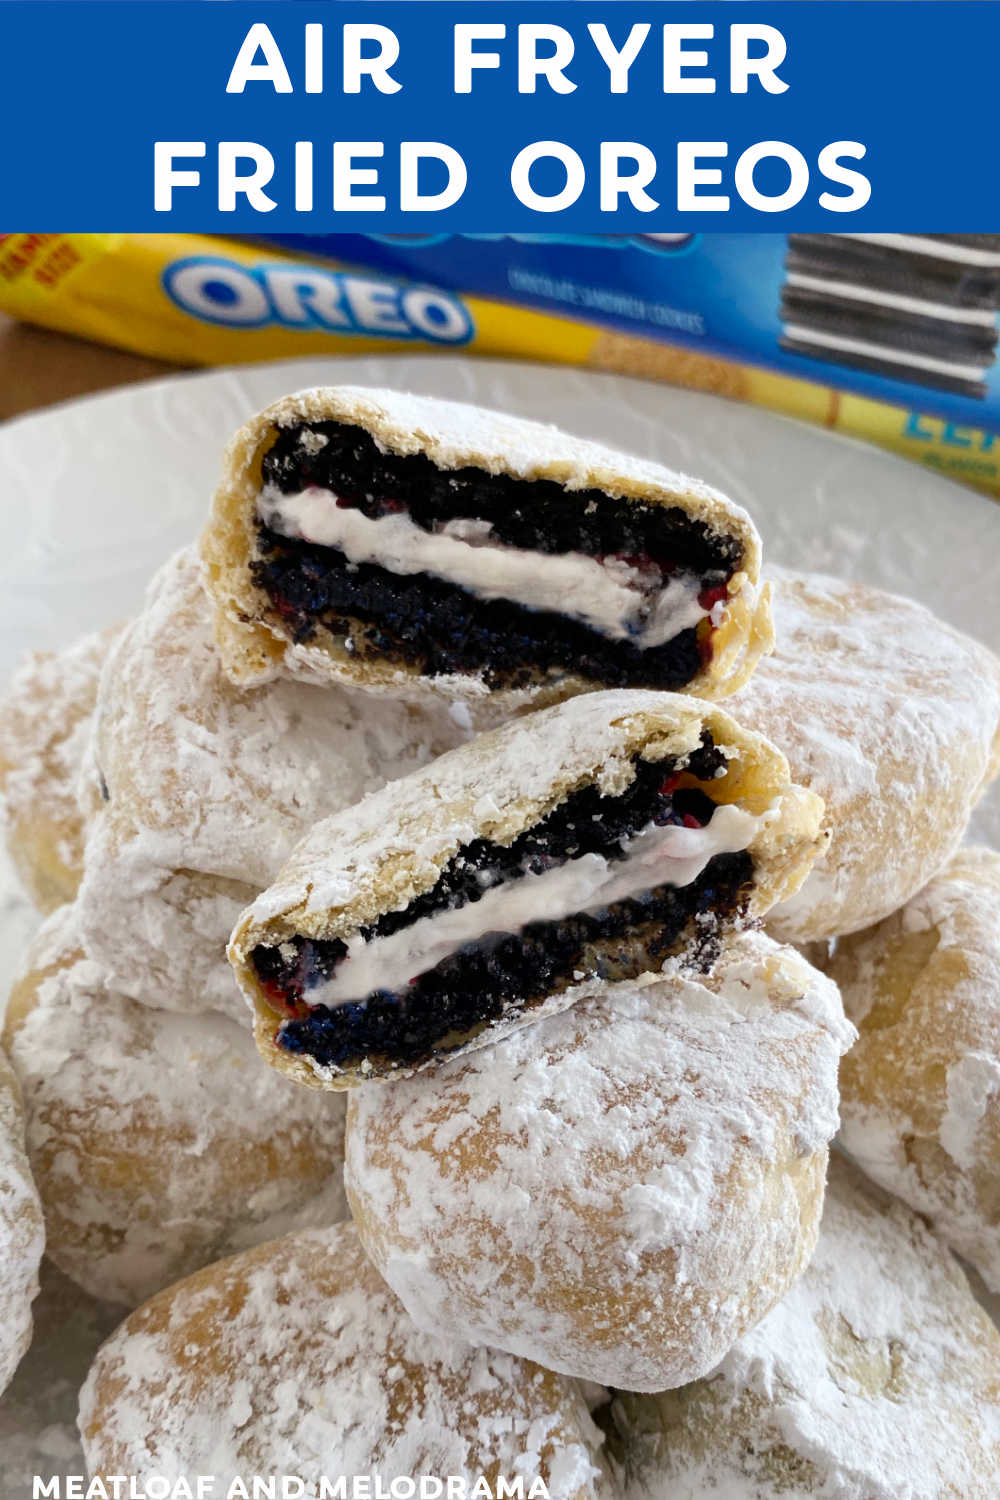 Make Air Fryer Fried Oreos with crescent roll dough and powdered sugar for a super easy dessert that's better than fried Oreo cookies you get at the fair! No hot oil and no mess with this easy and delicious sweet treat! via @meamel